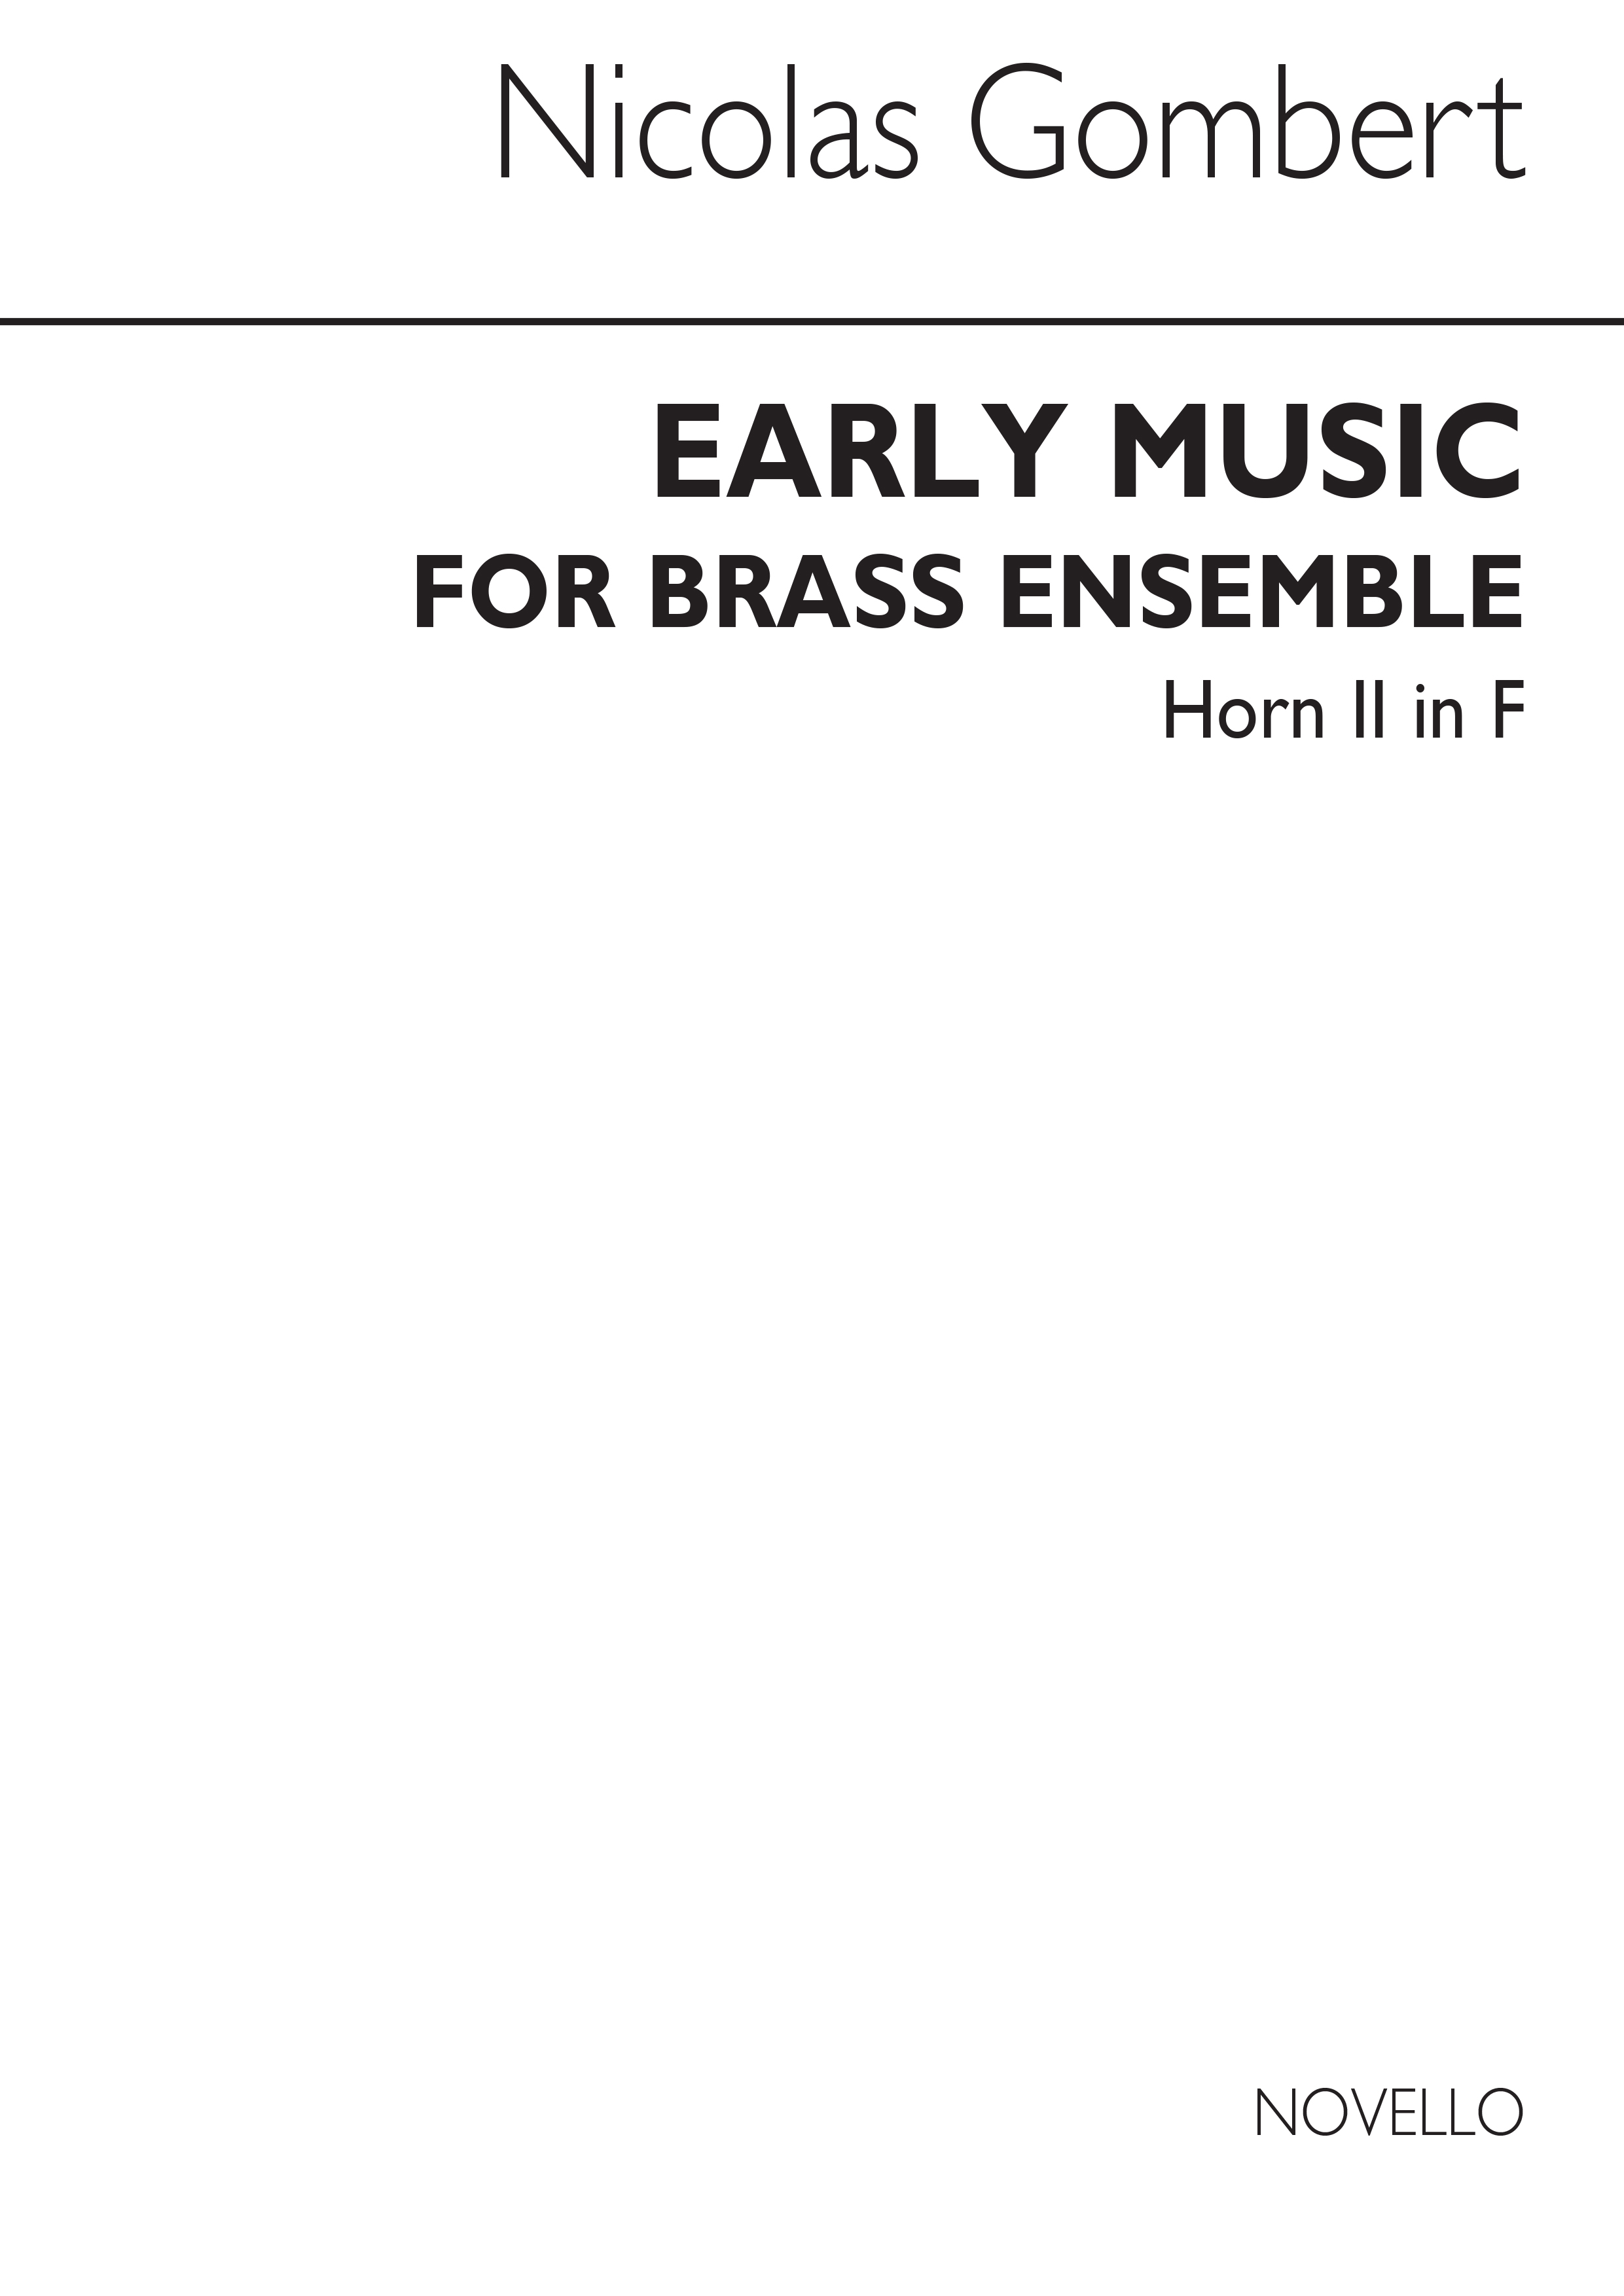 Lawson: Early Music For Brass Ensemble (Horn2 In F Part)